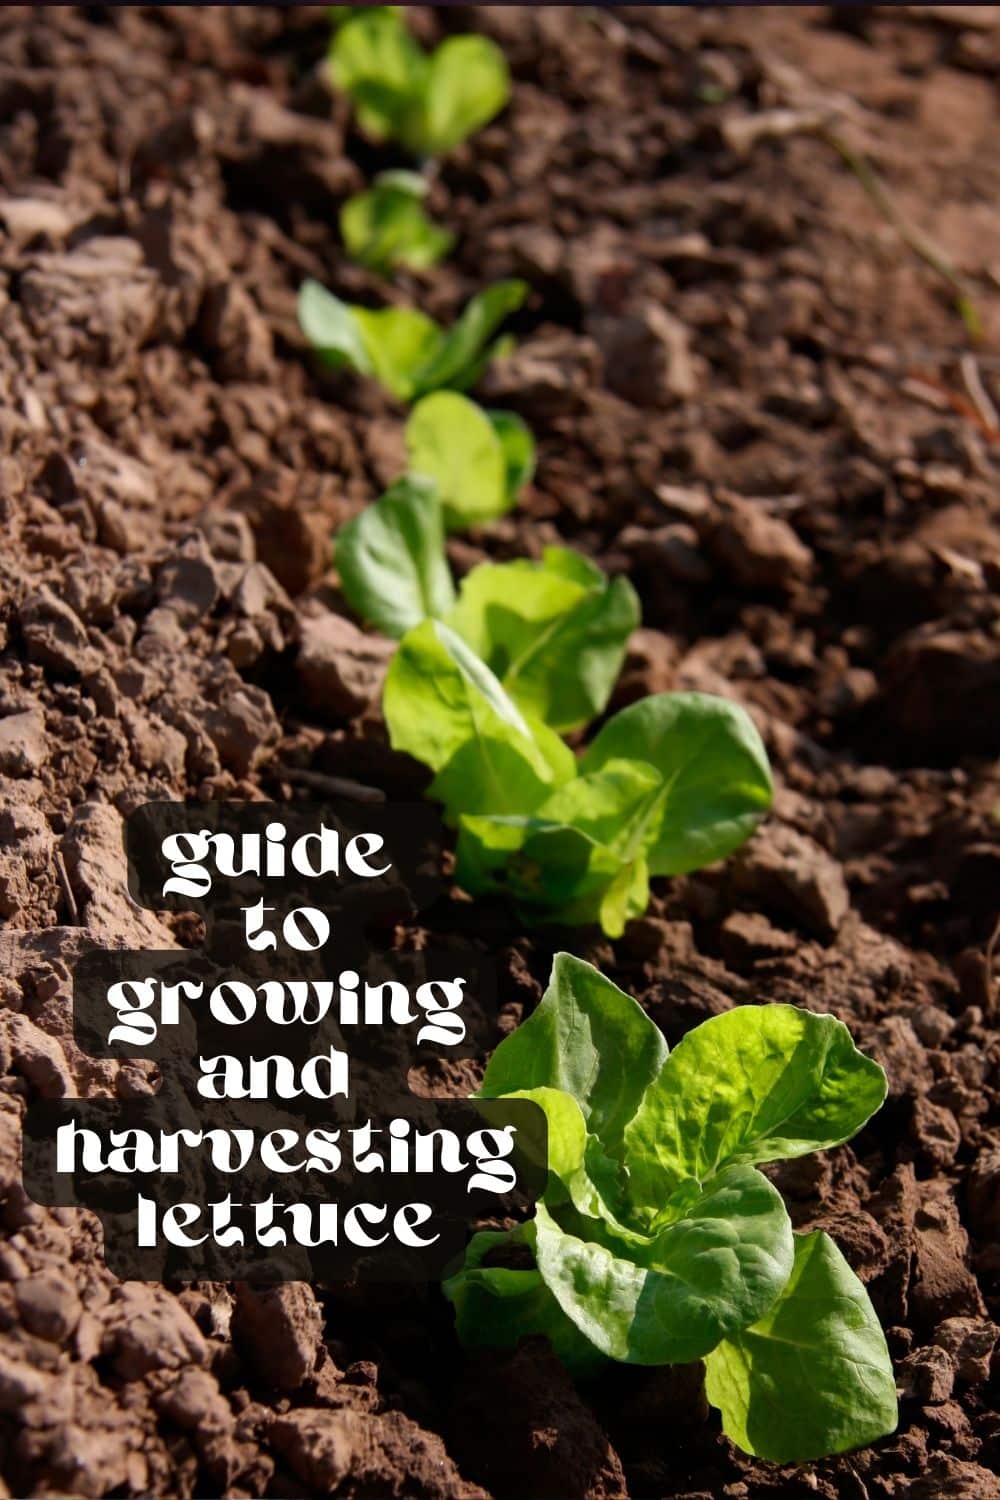 Growing your own food can be super rewarding. Not only will it save you money in the long run, but you'll love knowing exactly where your food has come from. But which food should you try growing first? Well, lettuce is a great place to start! If you've been considering growing and harvesting your own lettuce, this is your sign to go for it. 